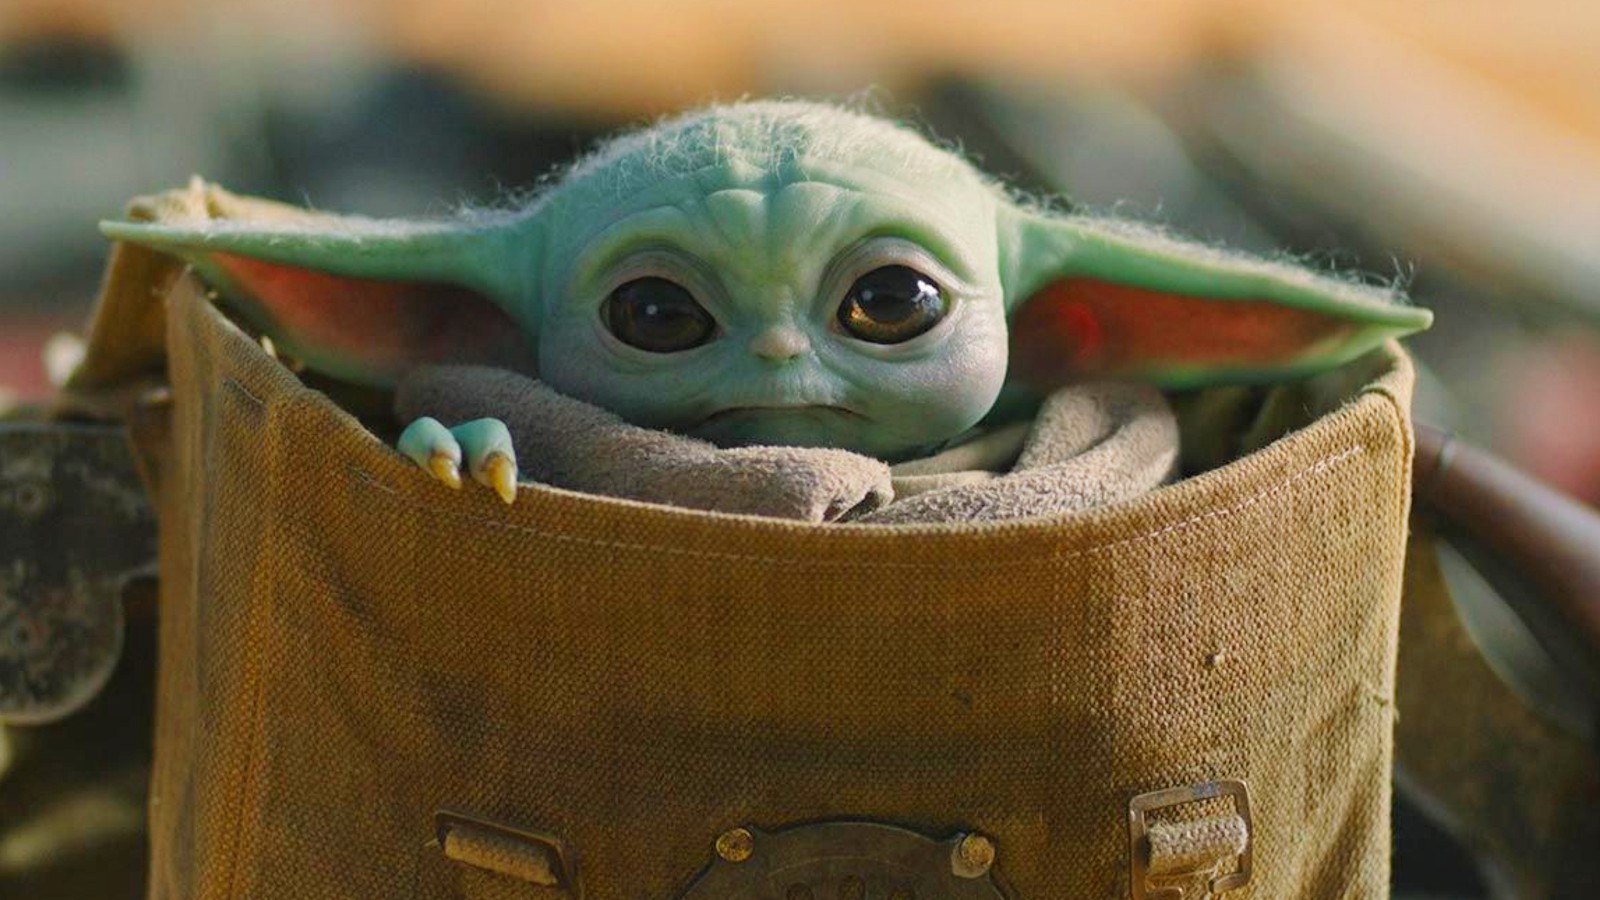 New Star Wars Movie Featuring The Mandalorian and Baby Yoda coming Soon